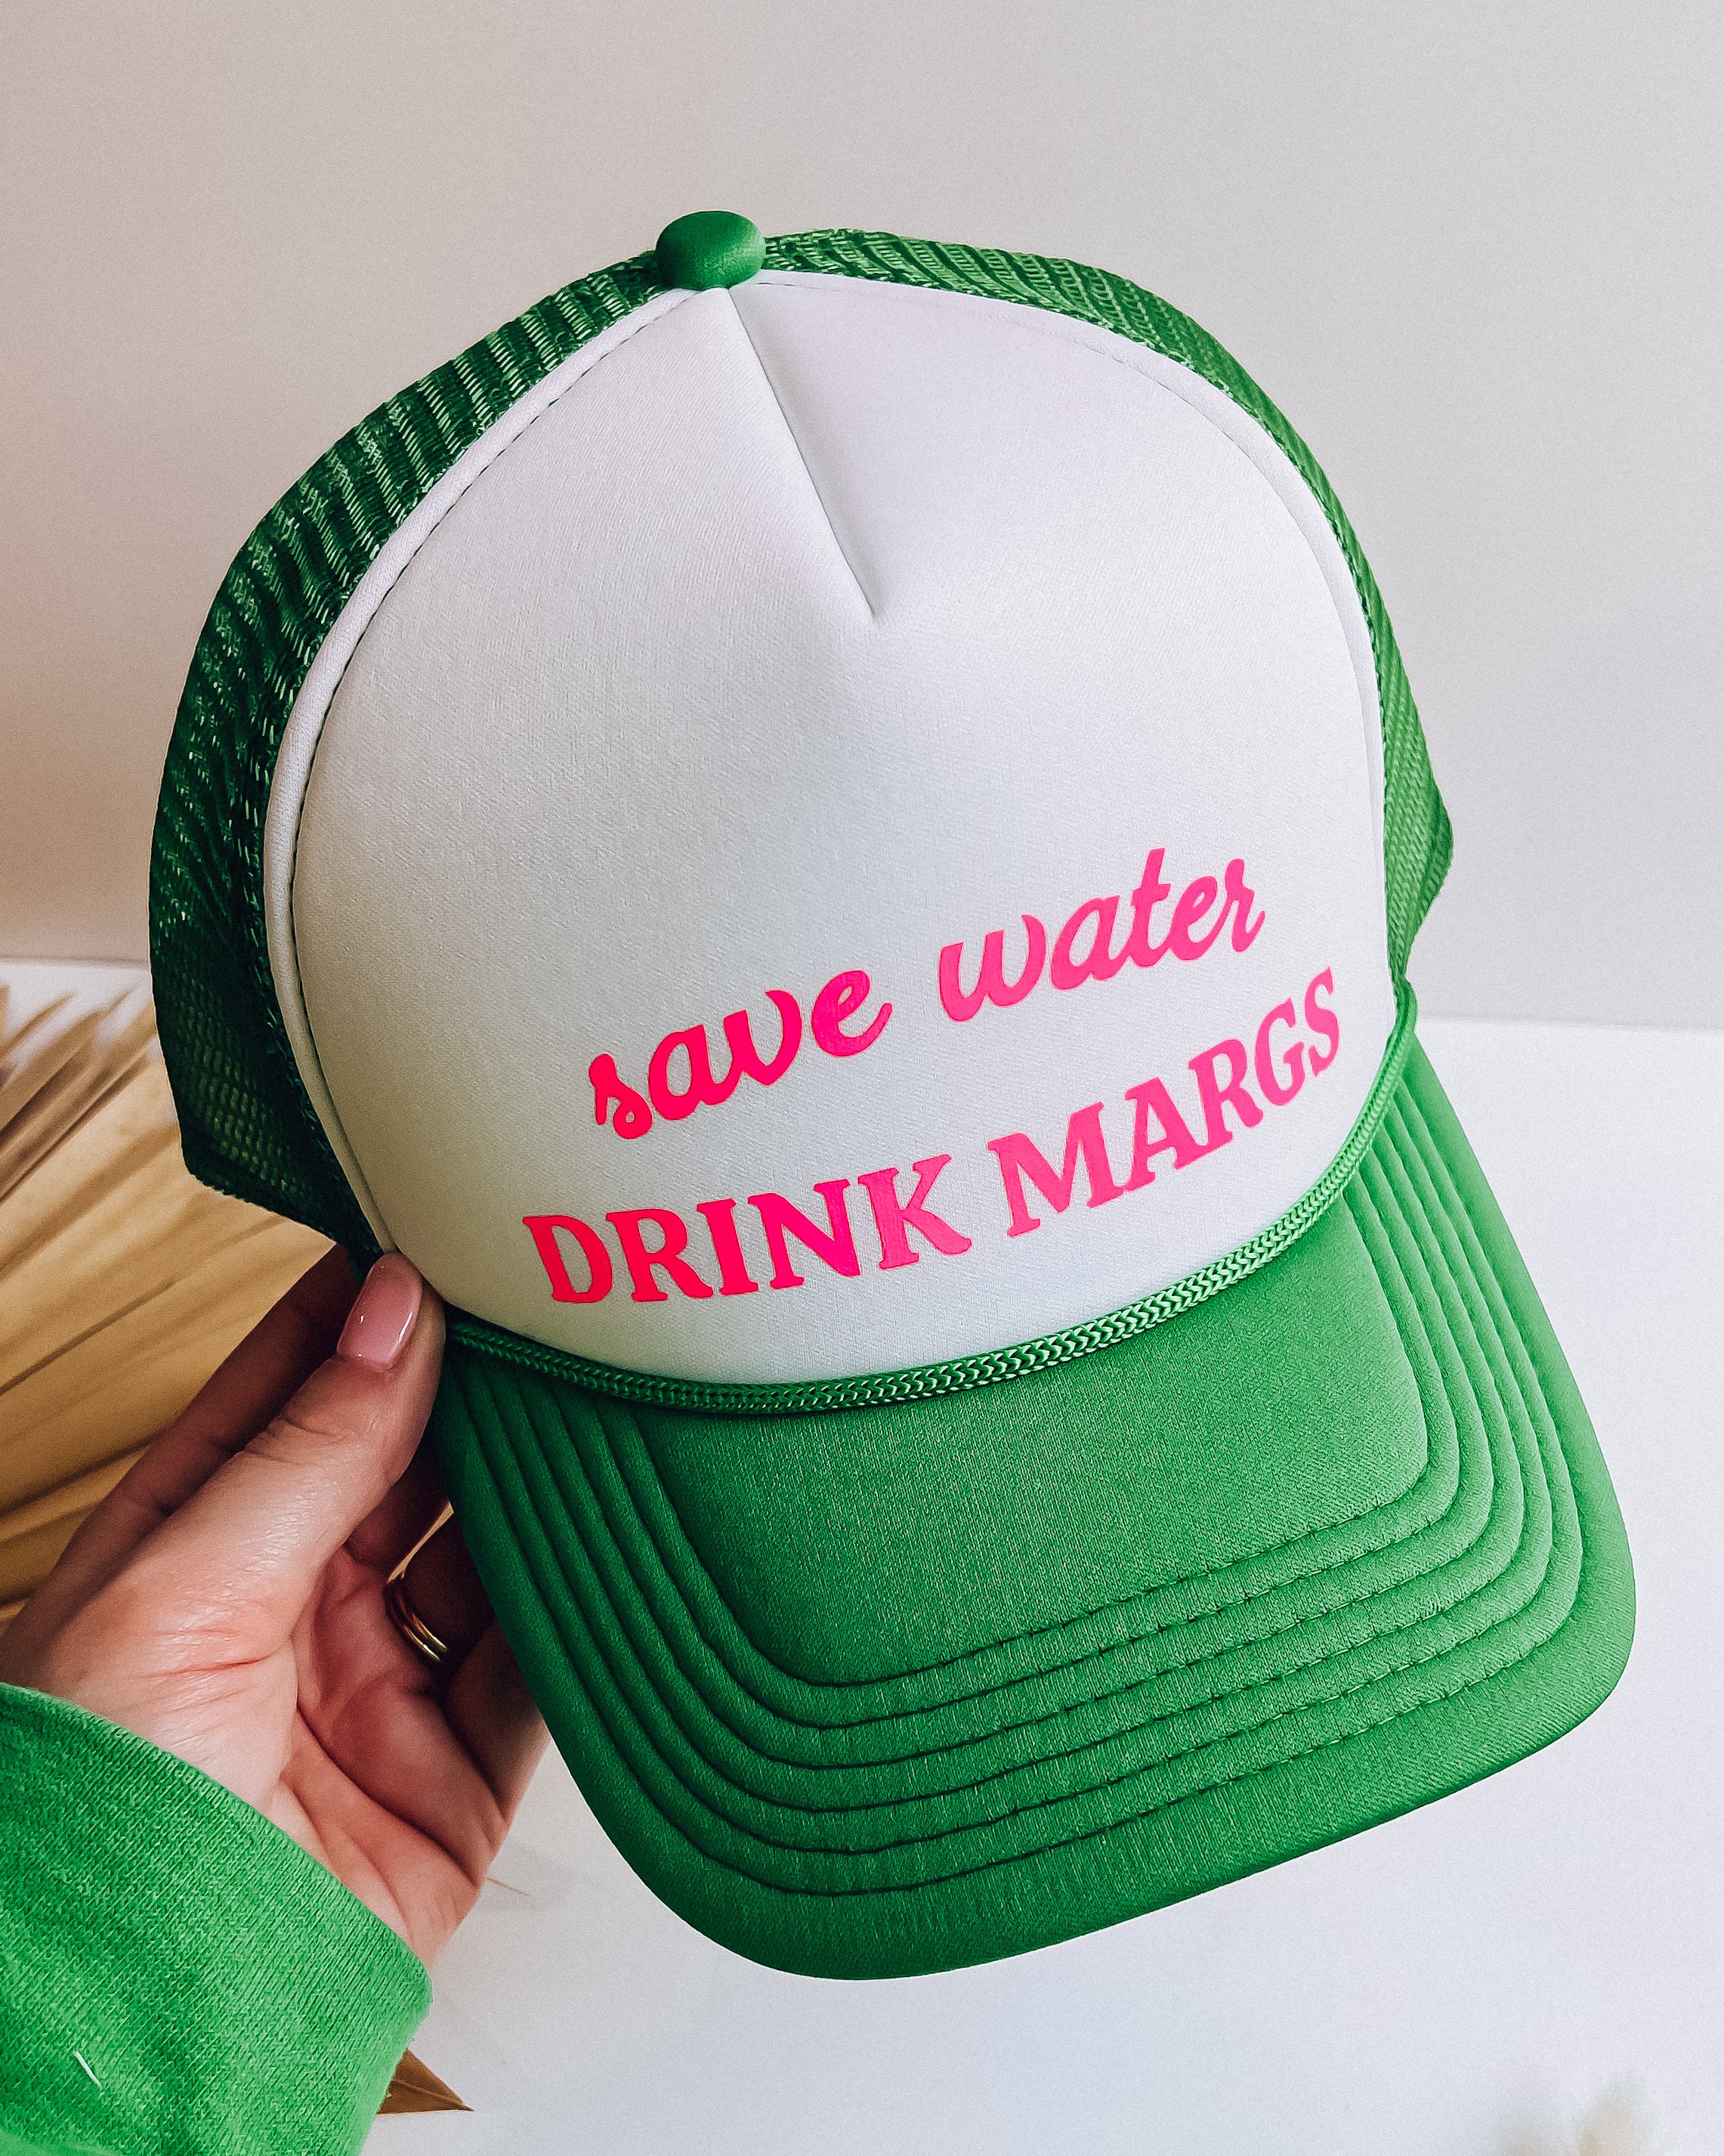 "Save Water Drink Margs" Trucker Hat [green/white+pink]